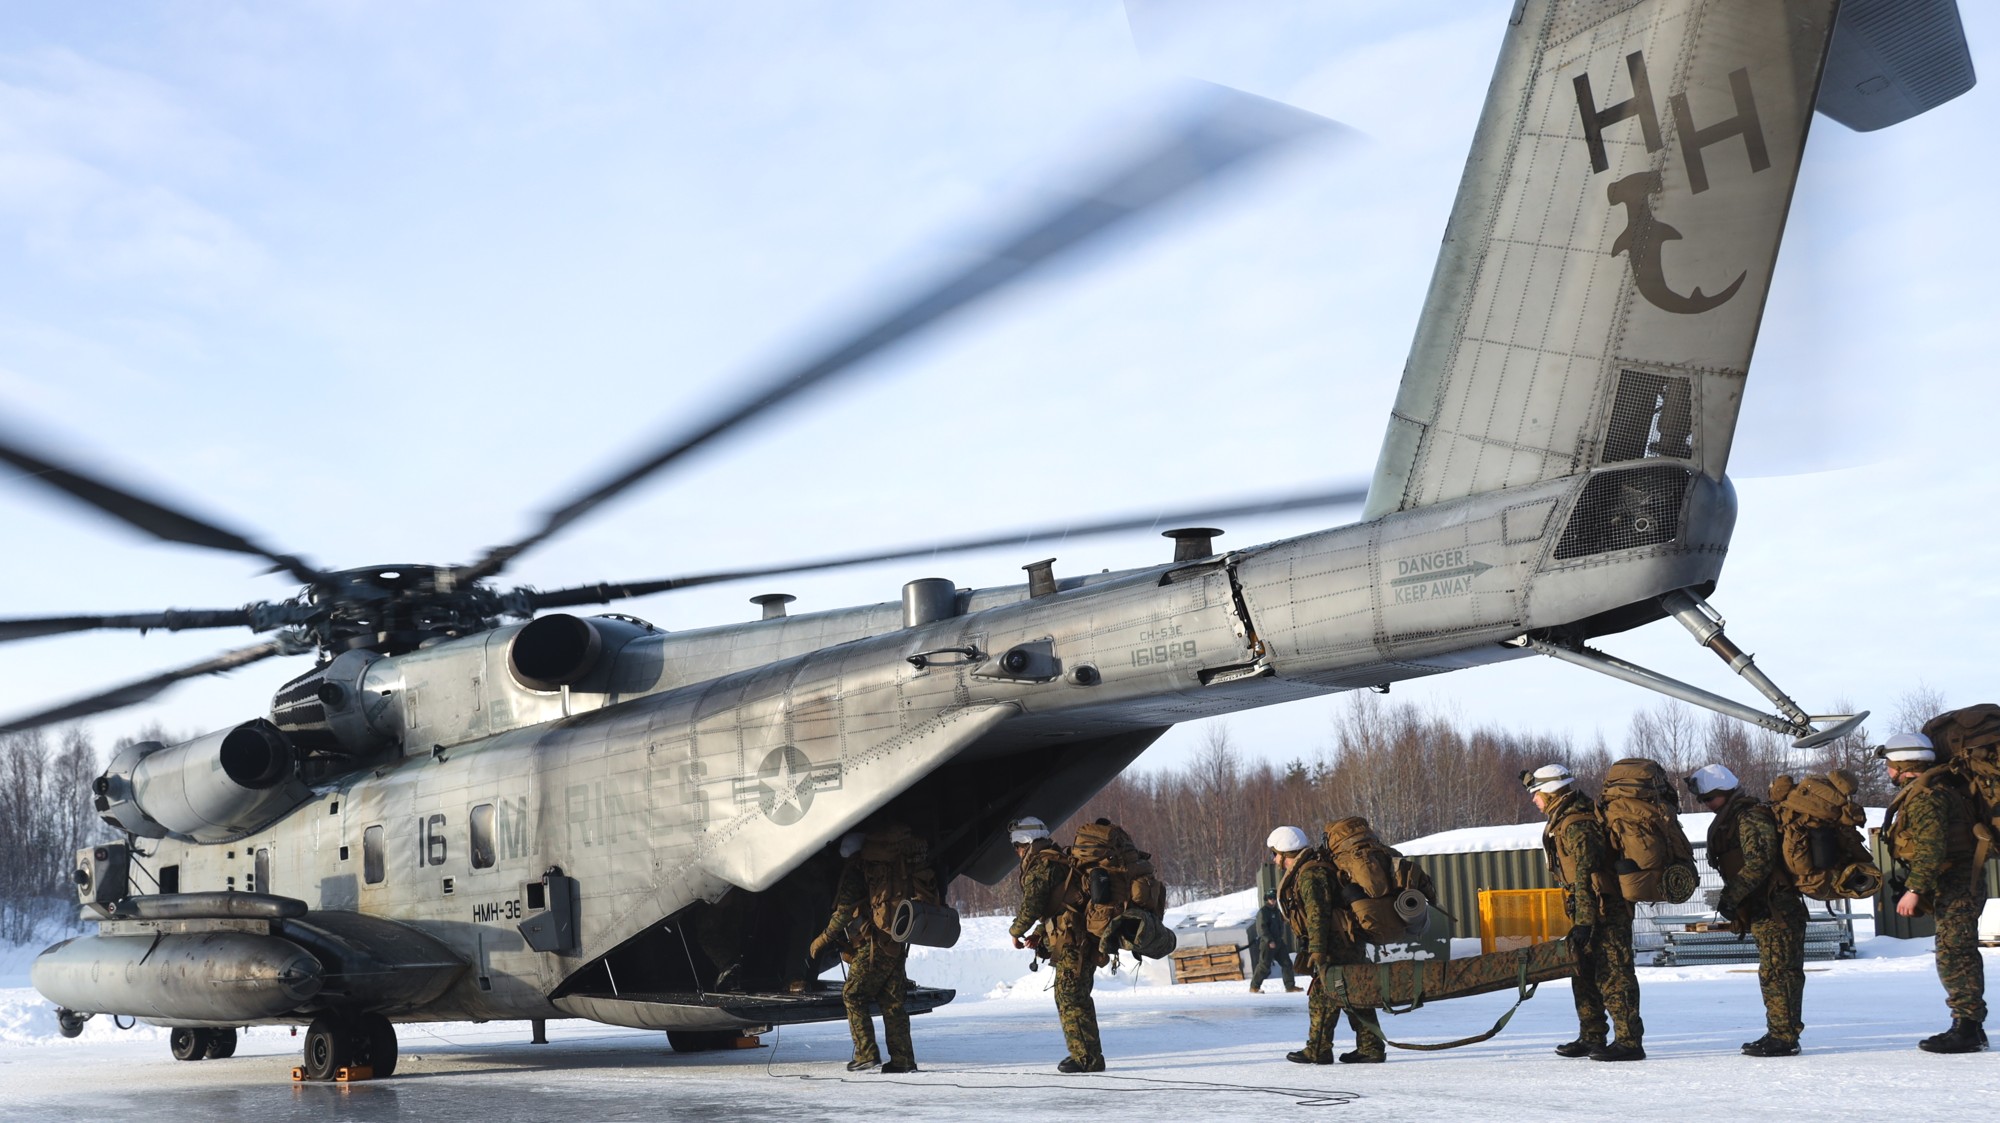 hmh-366 hammerheads ch-53e super stallion marine heavy helicopter squadron exercise cold response norway 162